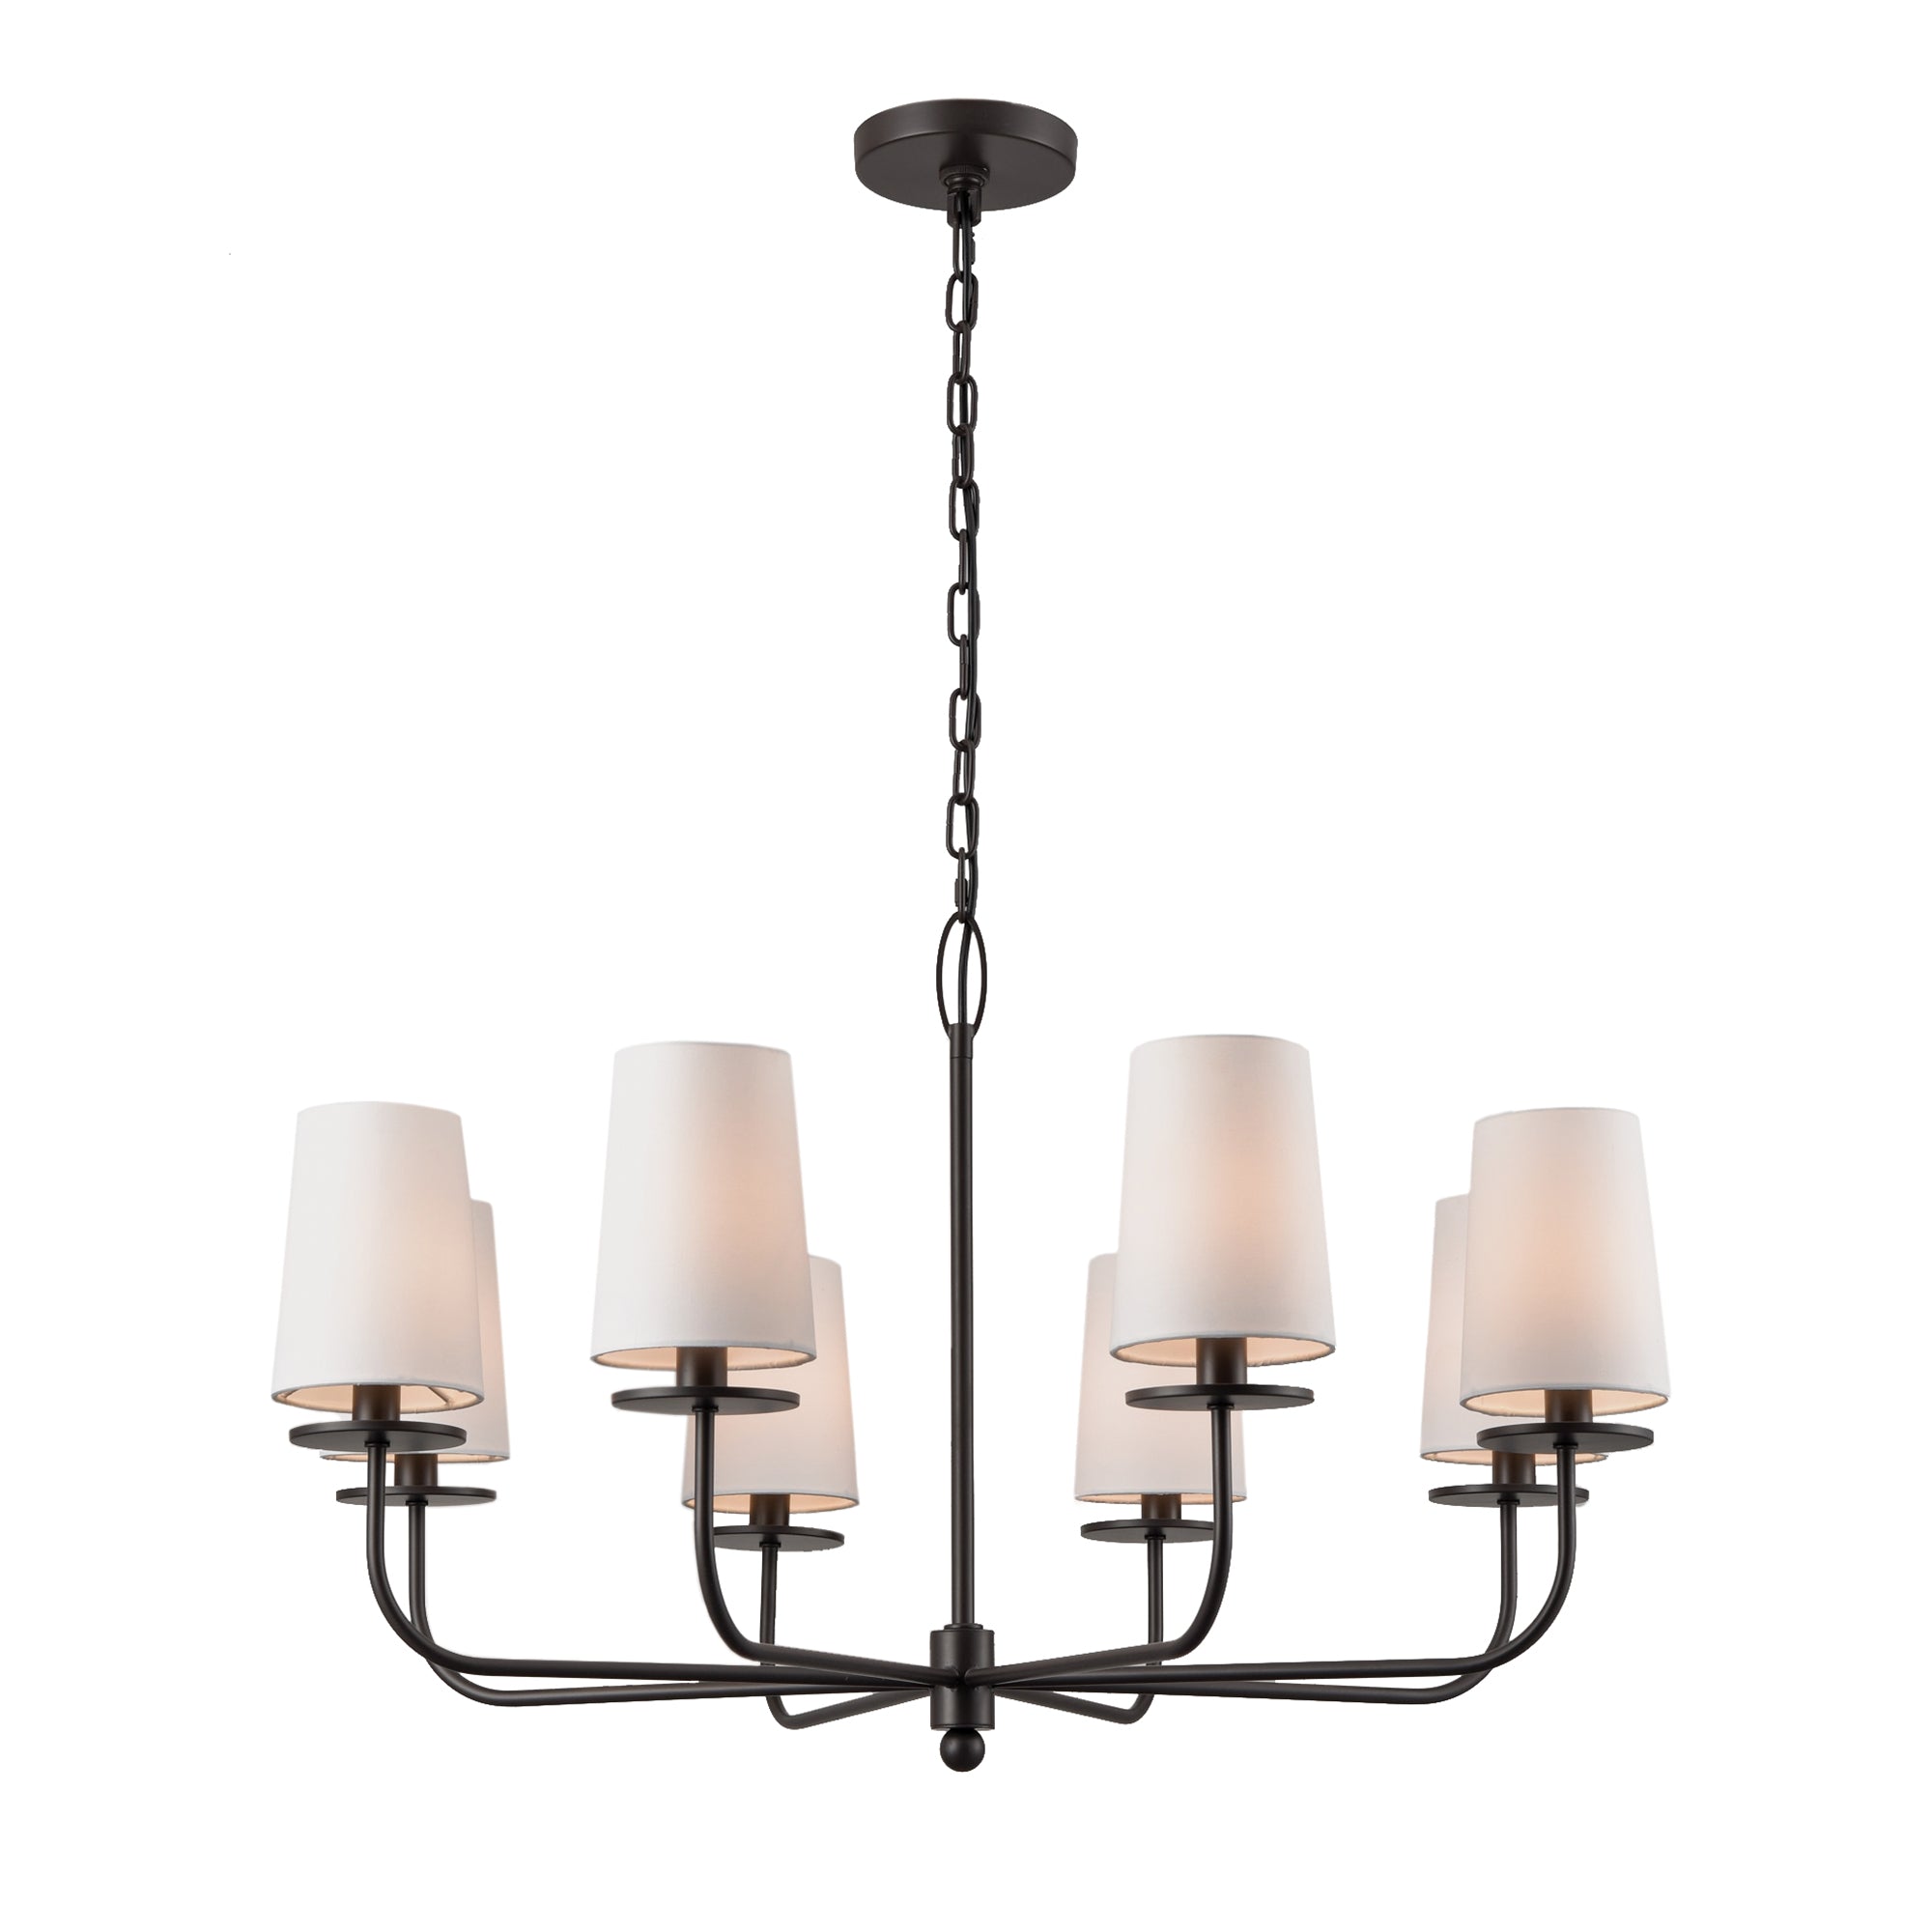 The Neville Chandelier is a fresh take on a classic shape. Subtle modern touches like the tapered shade and oil rubbed bronze finish complete the look. Amethyst Home provides interior design, new construction, custom furniture, and area rugs in the Austin metro area.